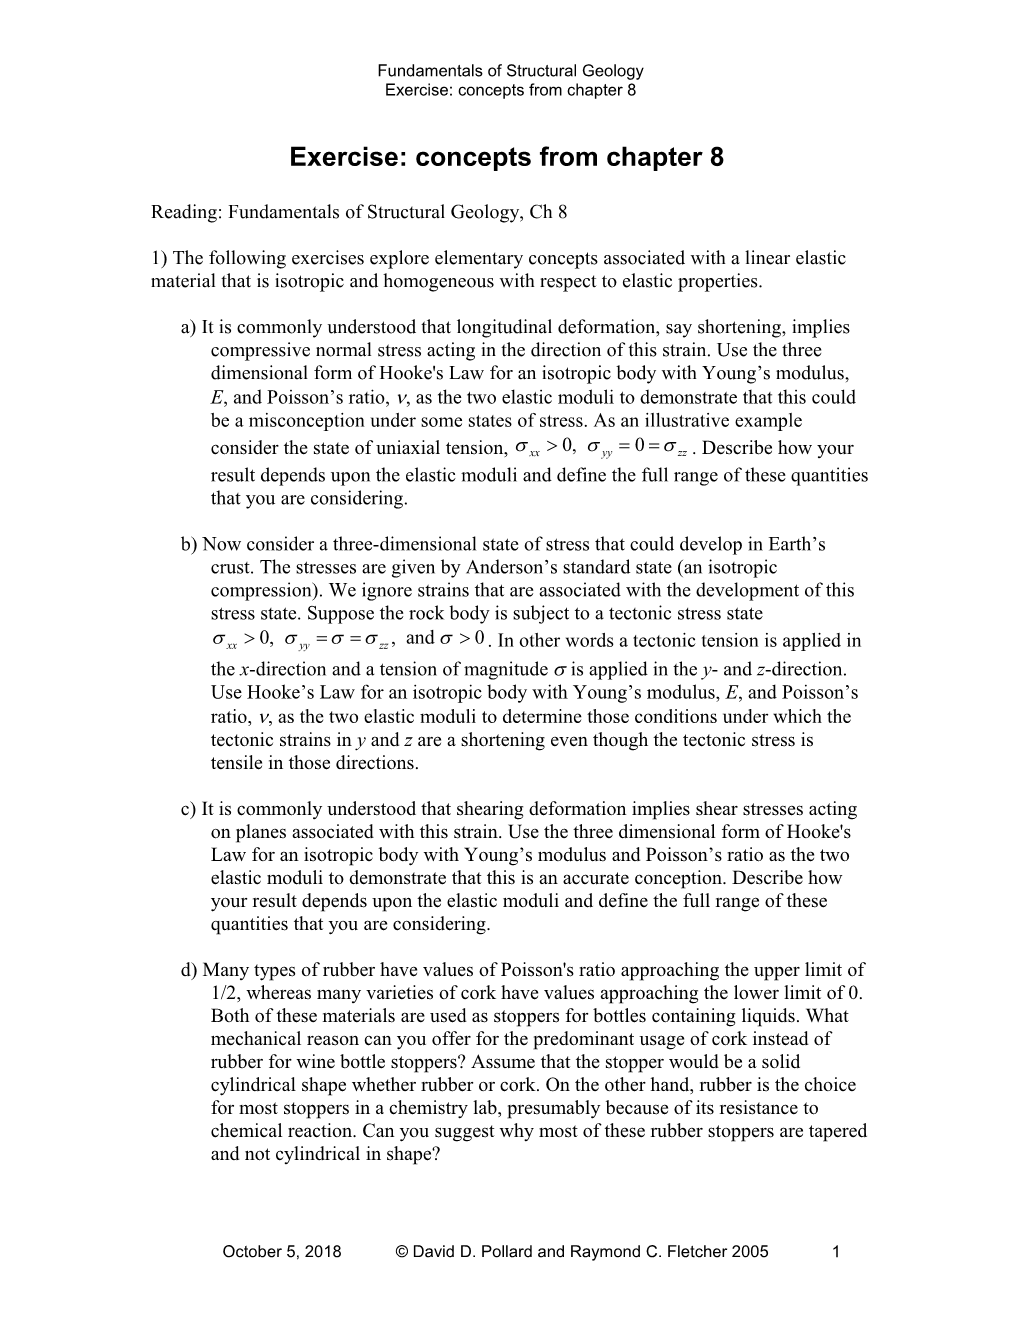 Exercise: Concepts from Chapter 8